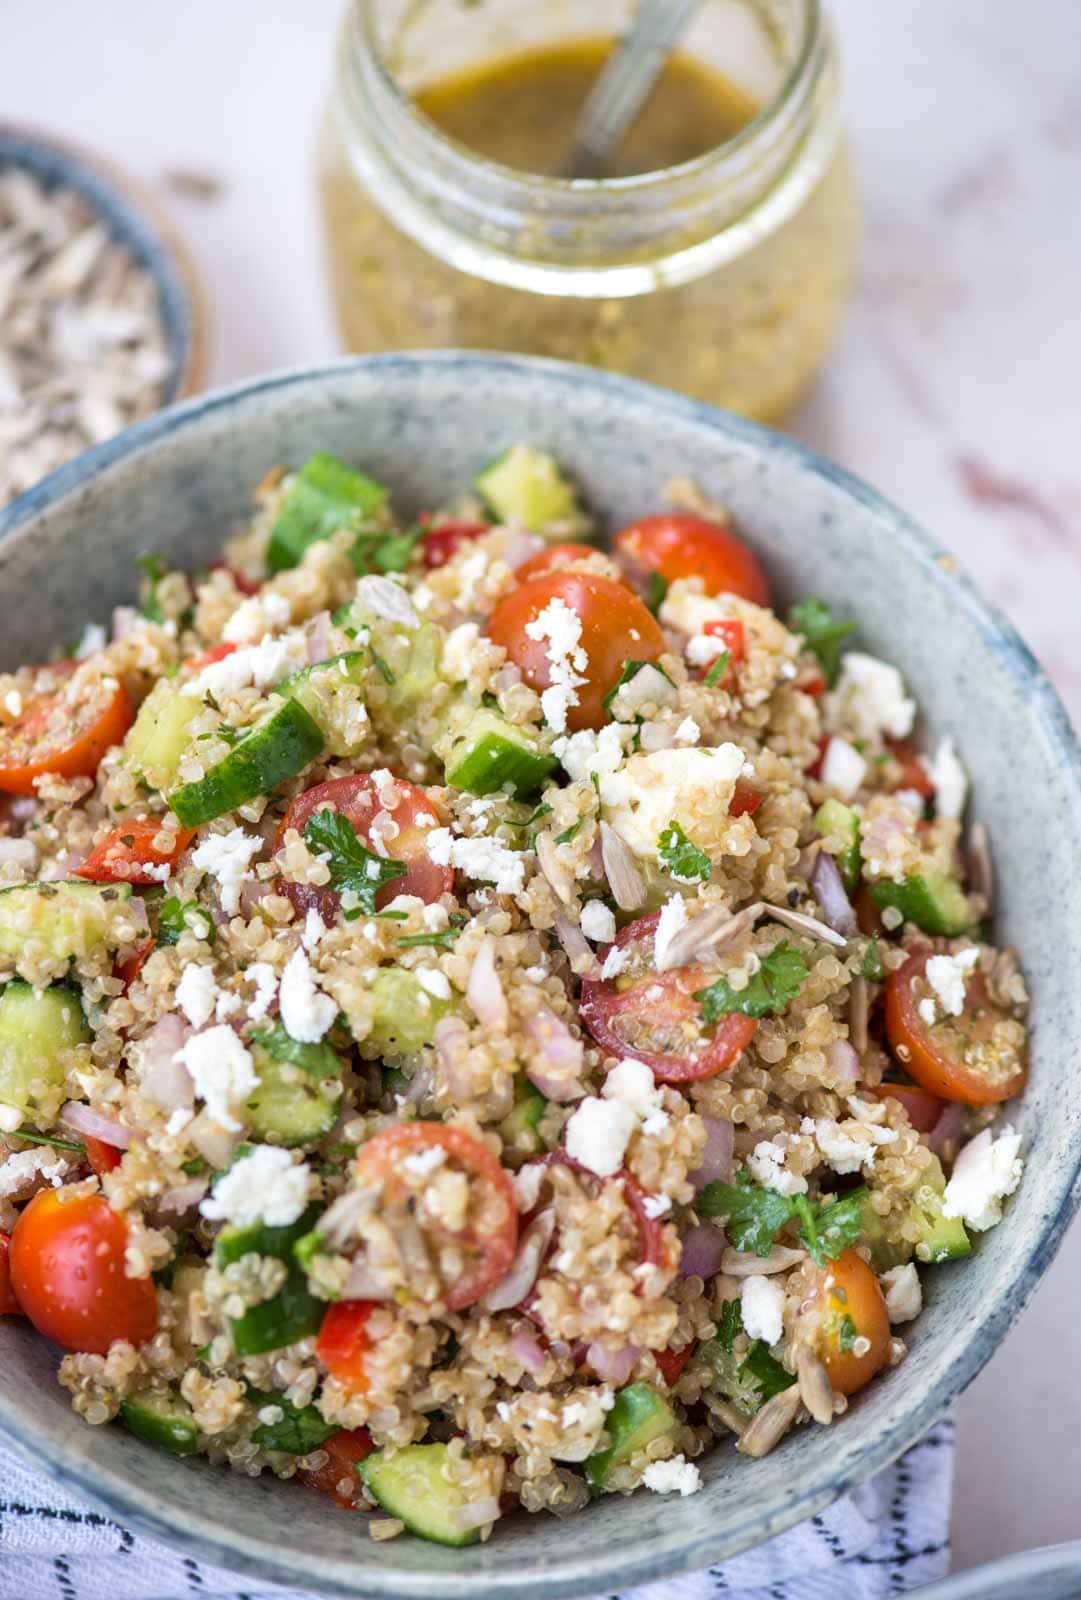 Bowl of flavourful and zesty quinoa salad ready to be served